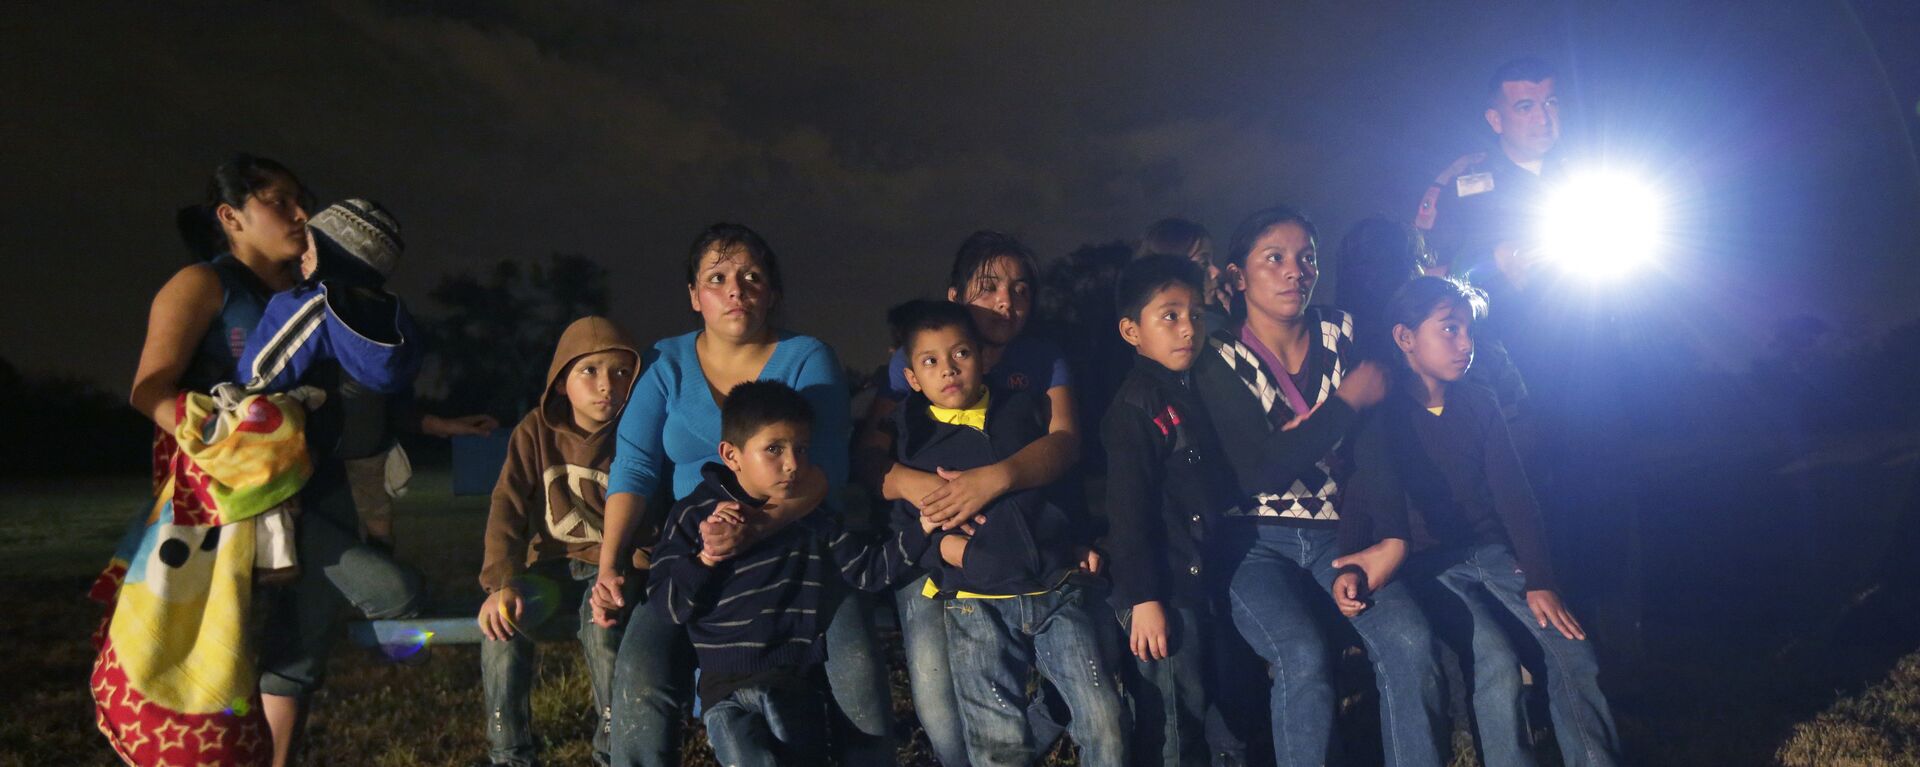 A group of young migrants from Honduras and El Salvador who crossed the U.S.-Mexico border illegally as they are stopped in Granjeno, Texas - Sputnik Mundo, 1920, 15.05.2018